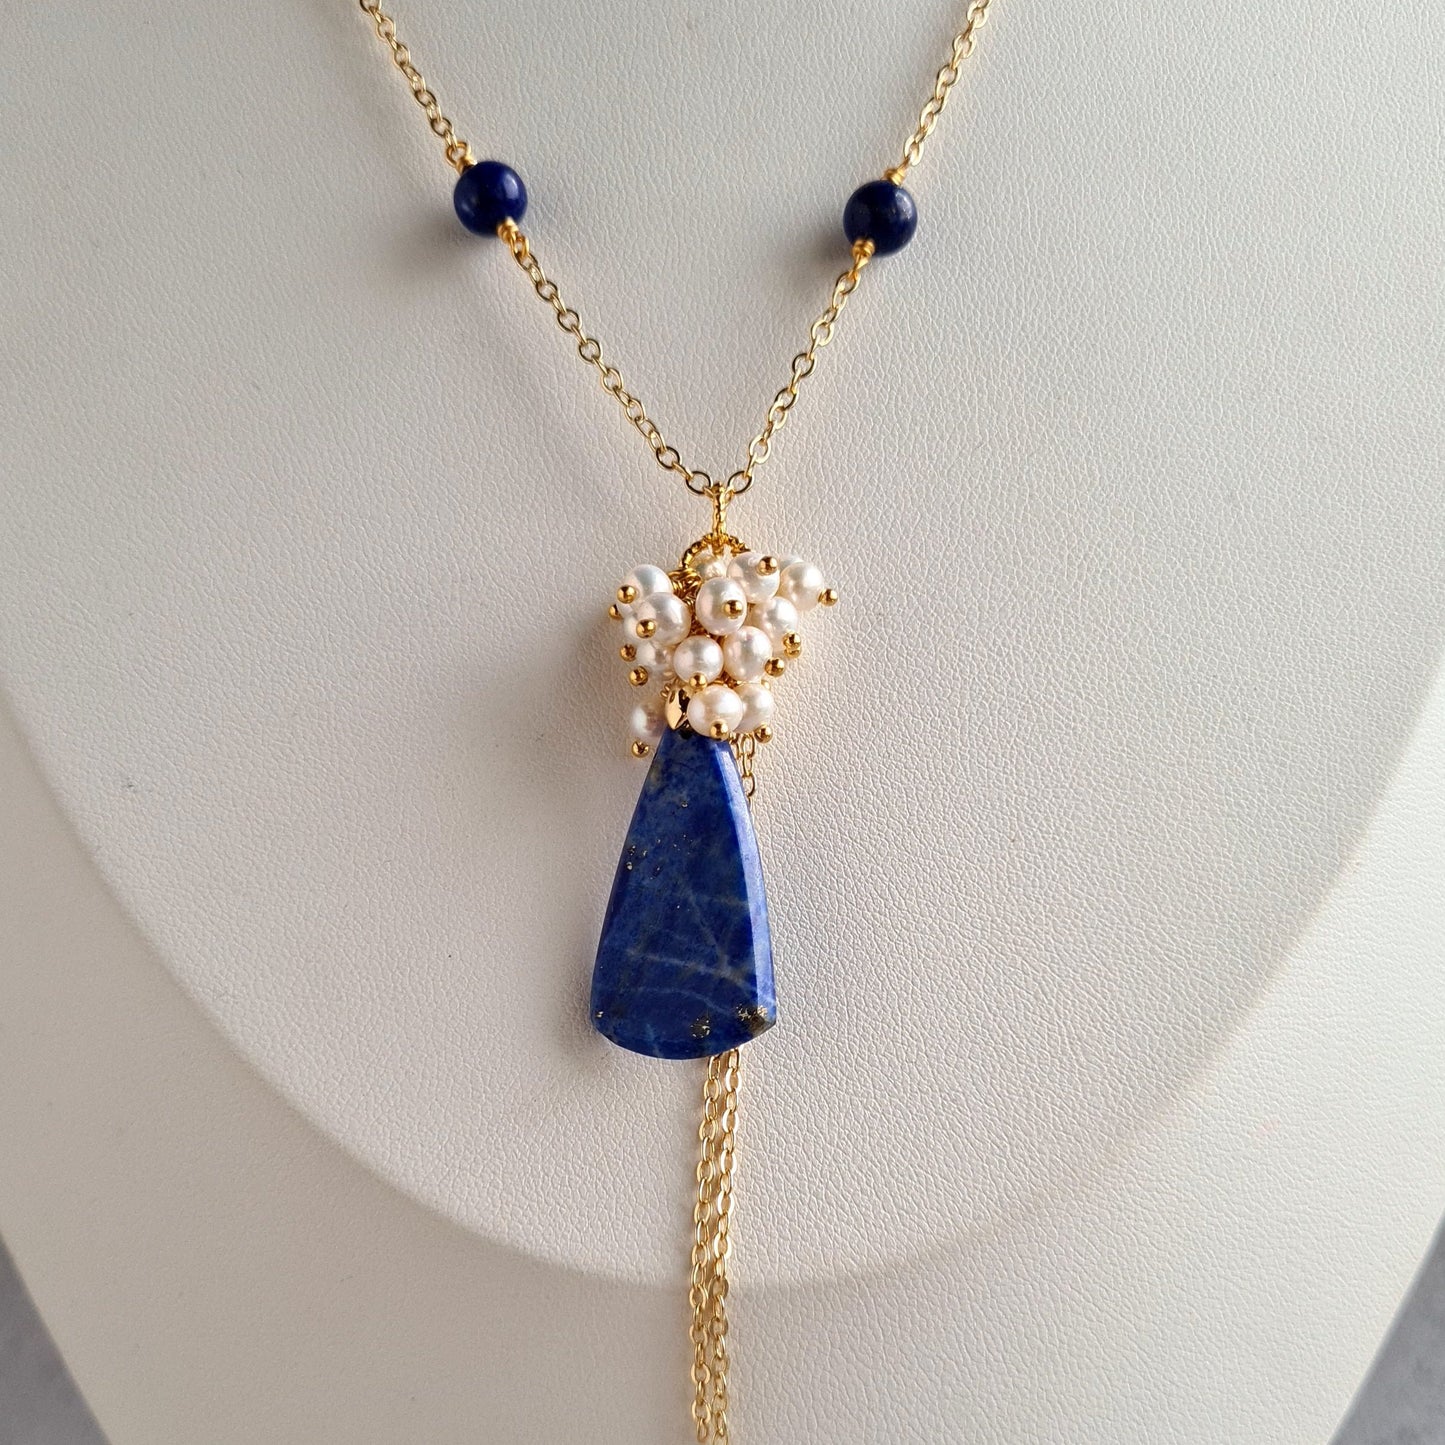 Lapis Lazuli Flat Cabochon with Fresh Water Pearl cluster Earrings & Necklace Set